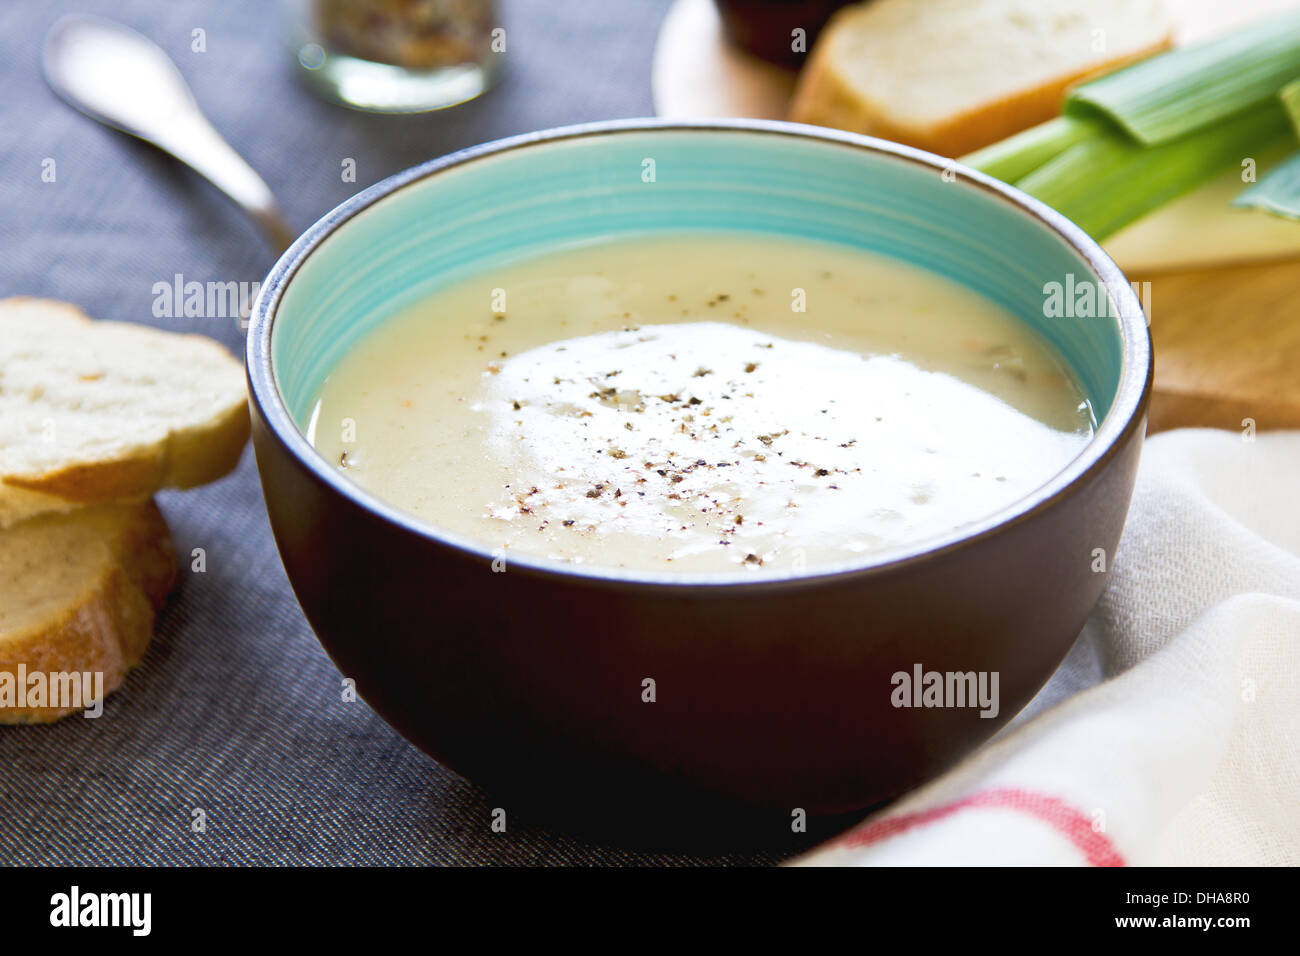 Leek and Potatoes soup by bread and fresh ingredients Stock Photo